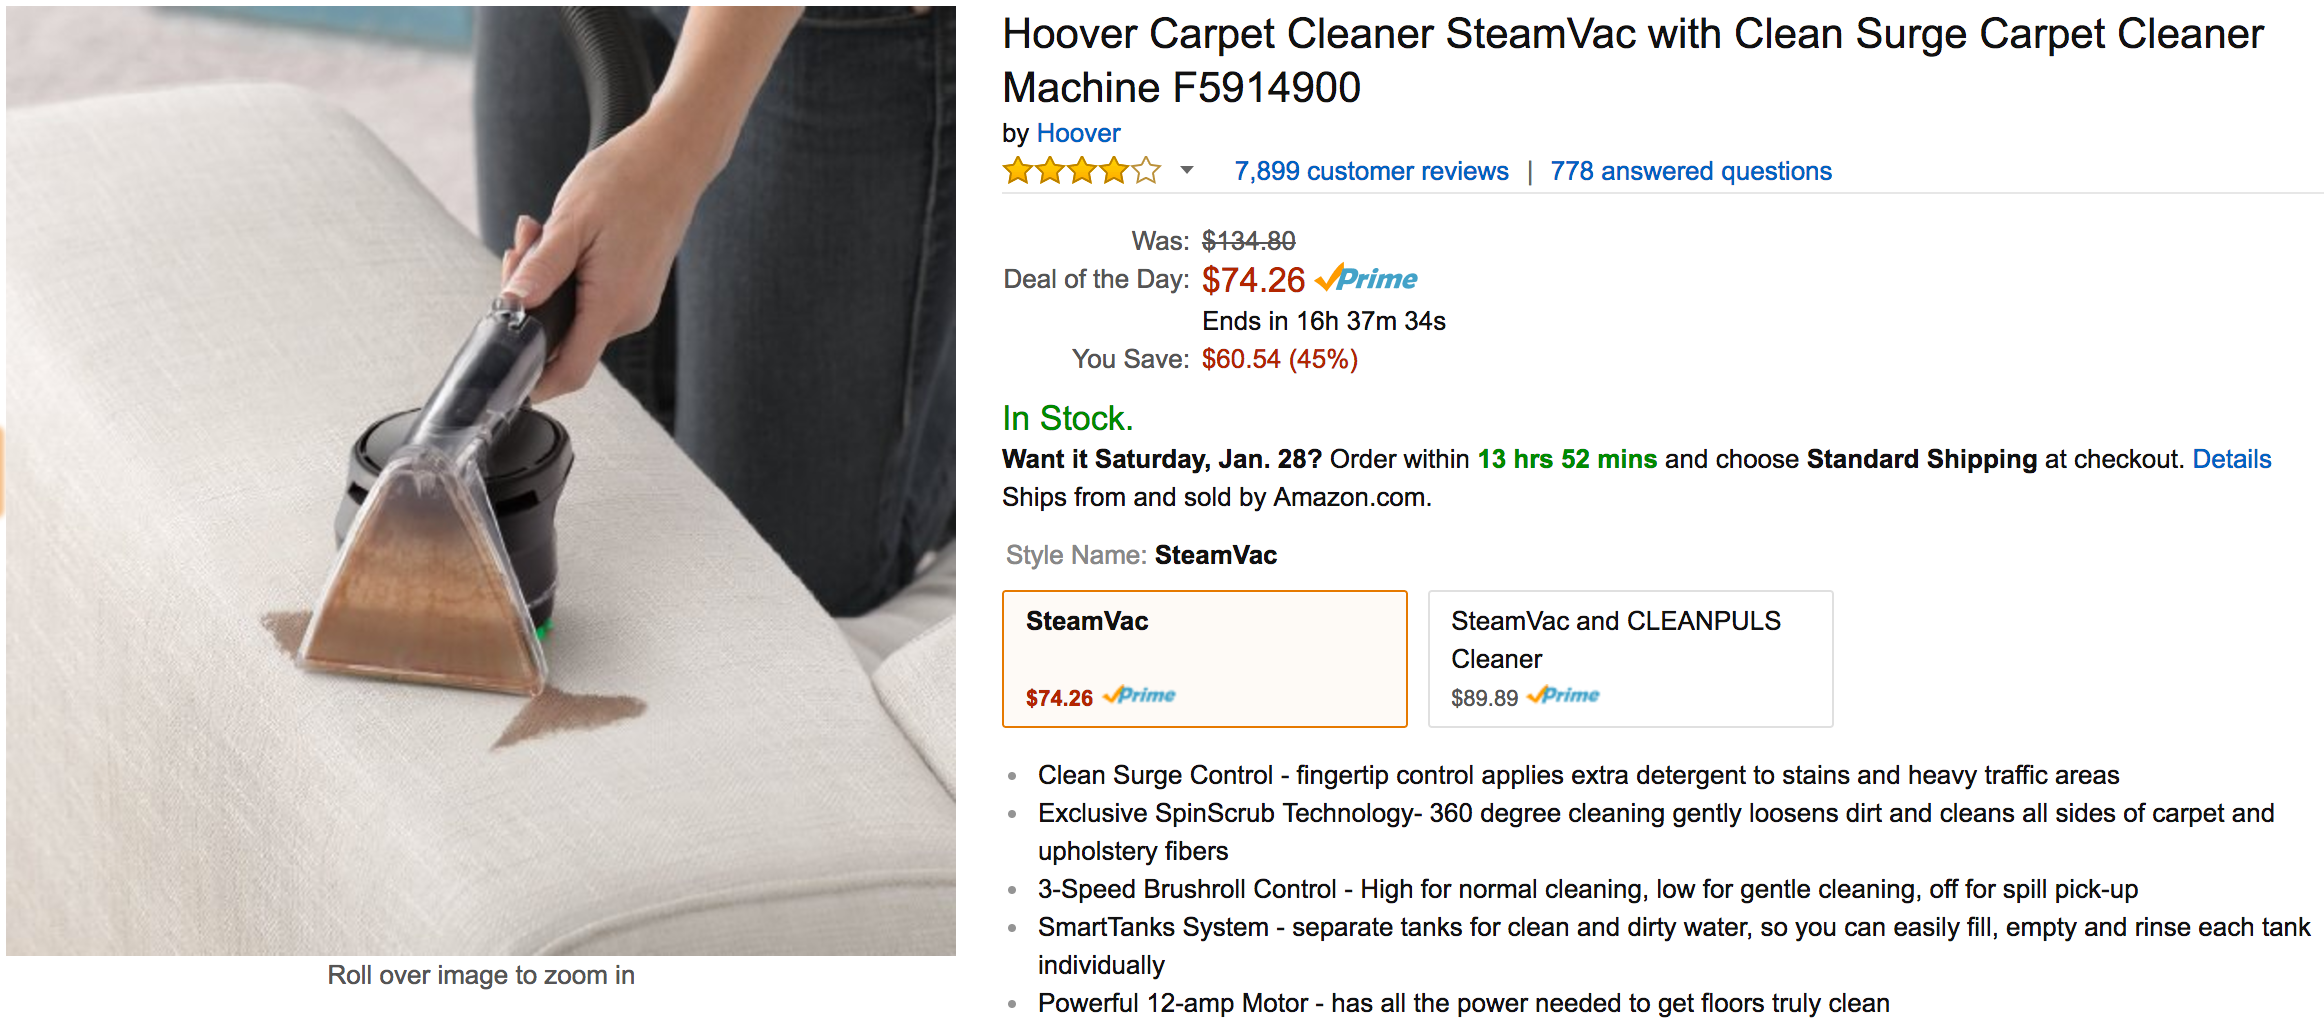 hoover-carpet-cleaner-steamvac-with-clean-surge-carpet-cleaner-machine-f5914900